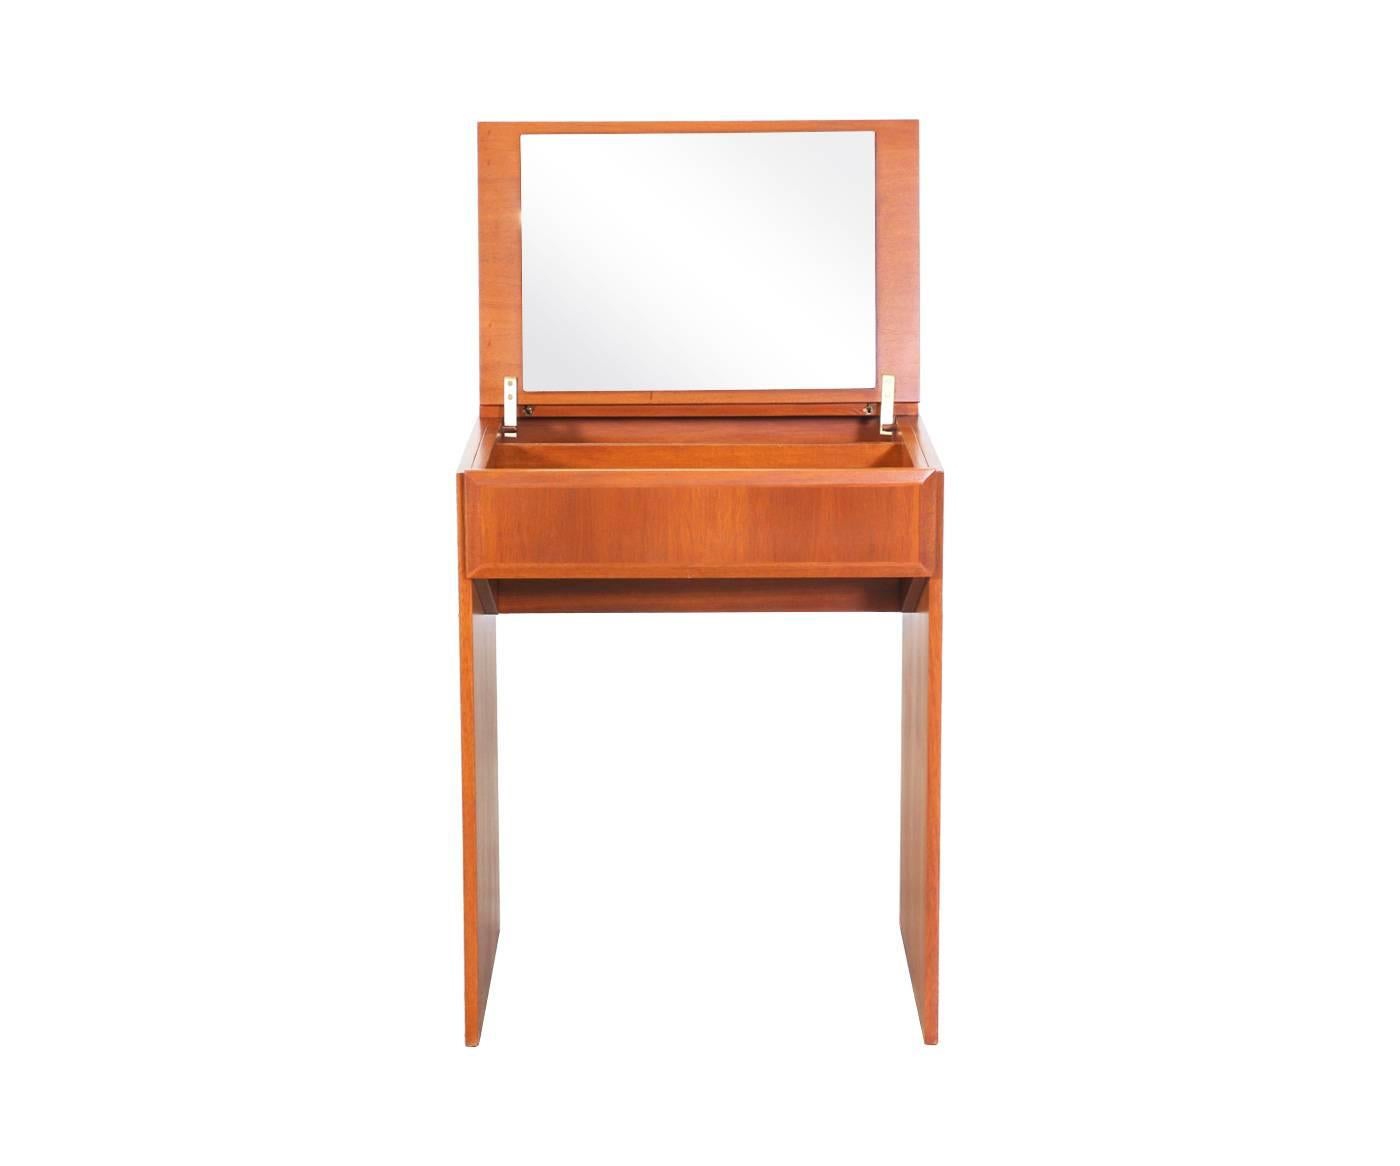 Designer: Unknown
Manufacturer: Unknown
Period/Style: Danish Modern
Country: Denmark
Date: 1950’s

Dimensions: 29.5″H x 23″W x 17.75″D
Materials: Teak, Mirror
Condition: Excellent – Newly Refinished
Number of Items: 1
ID Number: 4239